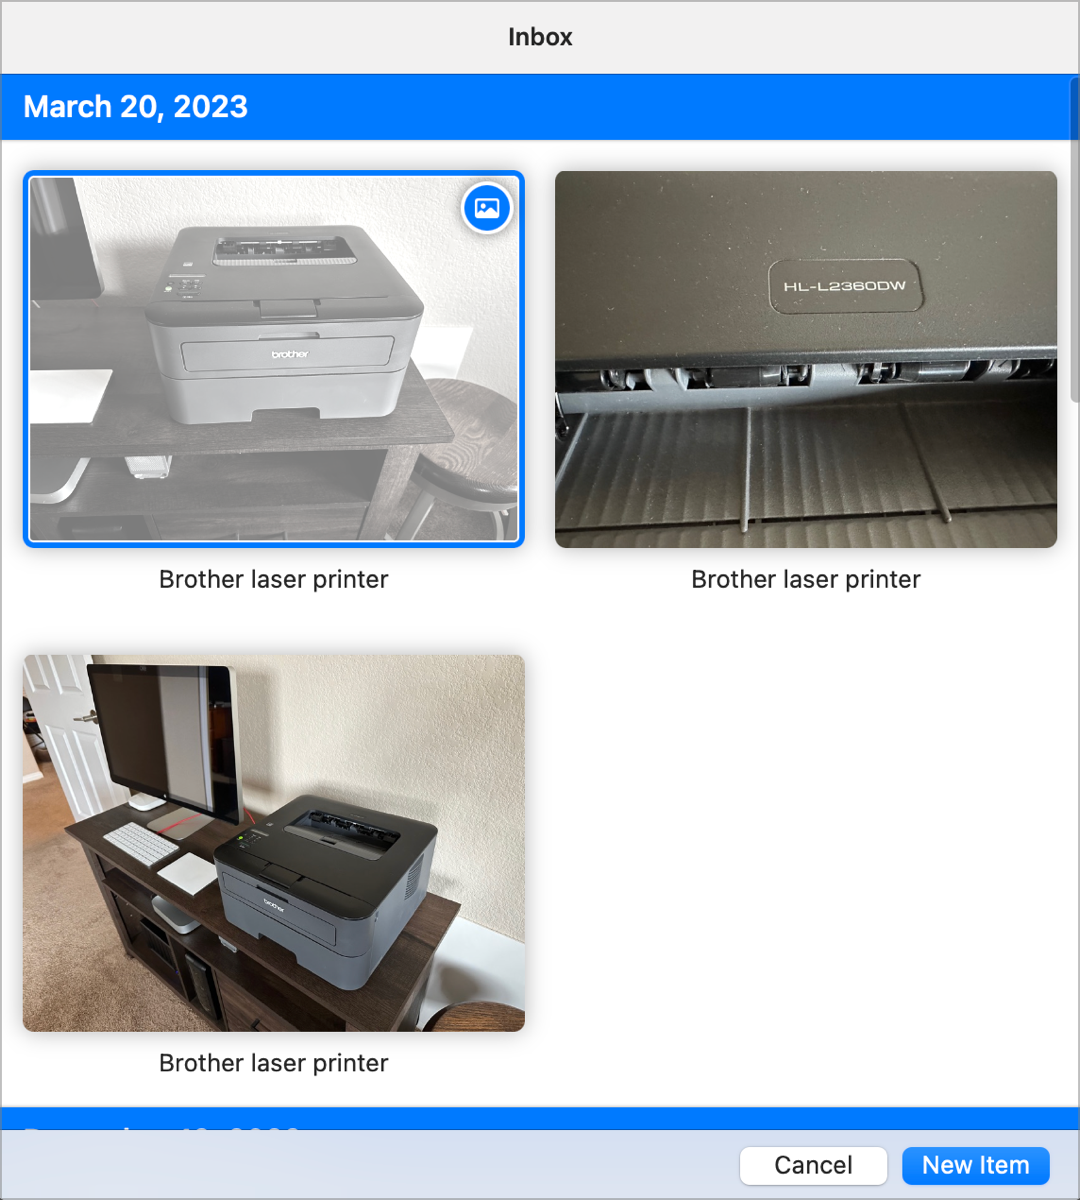 Inbox Showing 3 Photos of Laser Printer and New Item Button